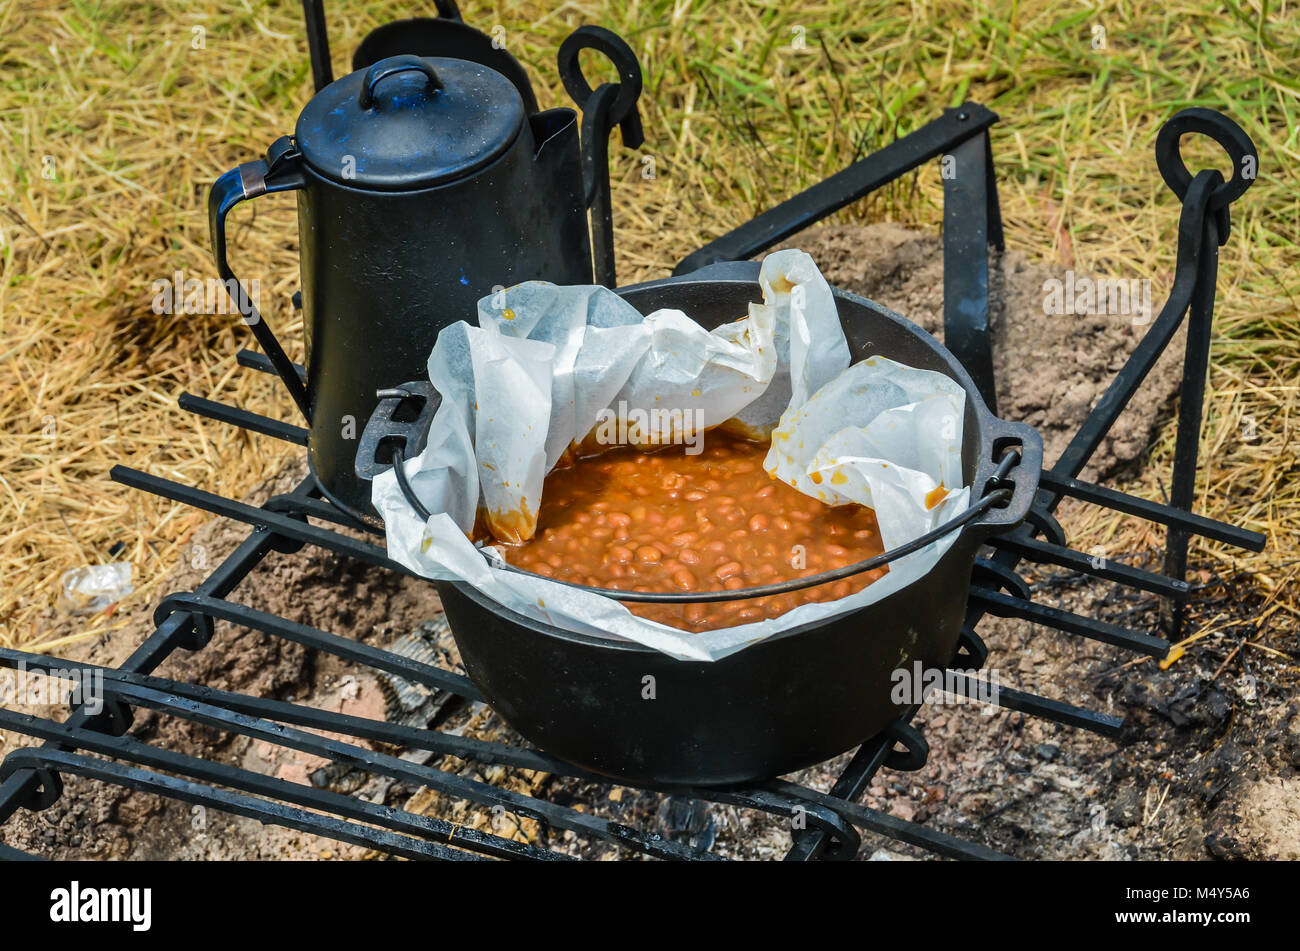 Traditional Boston Baked Beans cooked over hot coal in a black cast iron pot, with a kettle on the side. Stock Photo